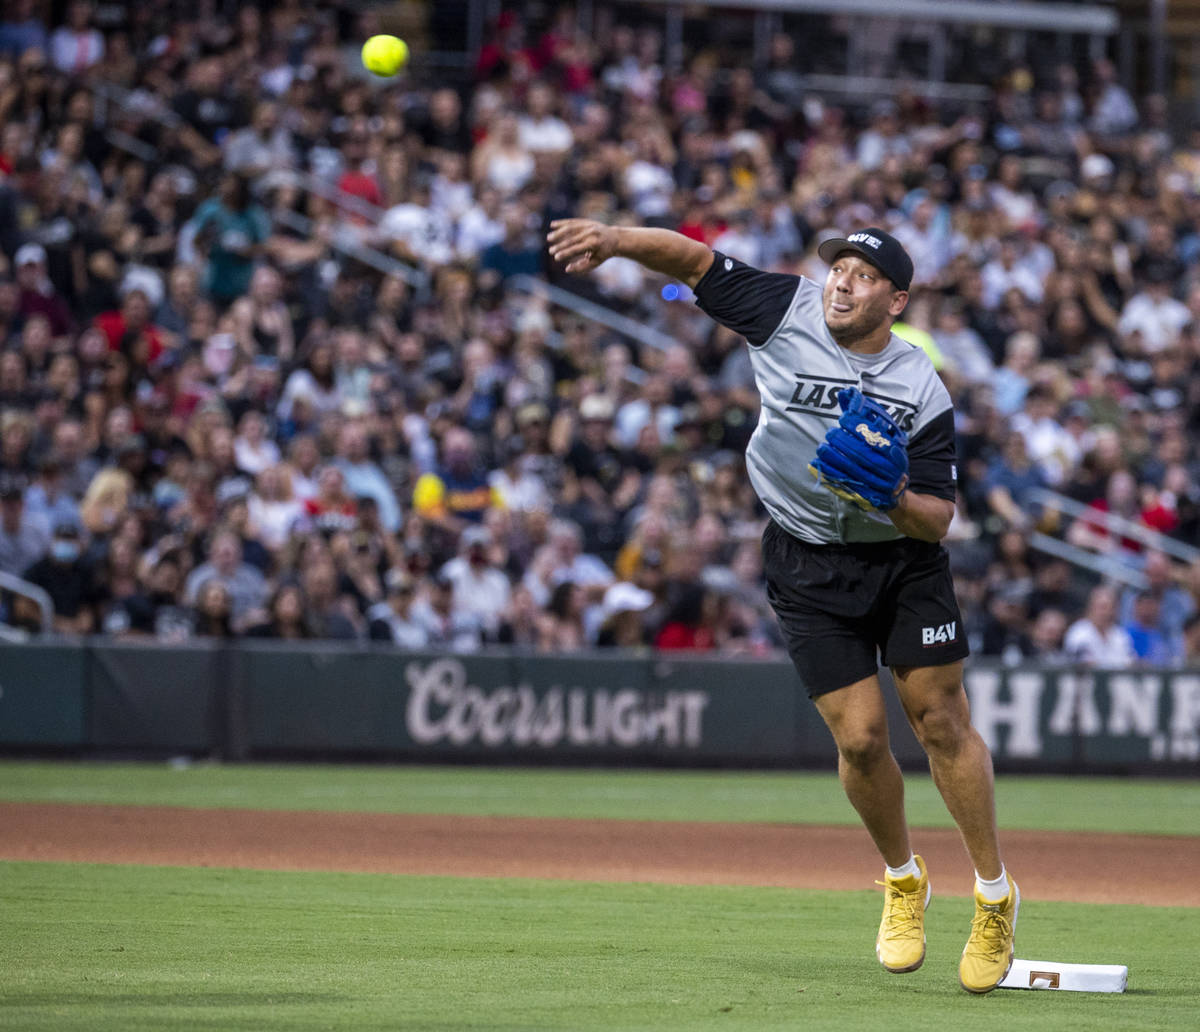 charity softball game involving players from the Vegas Golden Knights and Las Vegas Raiders at ...